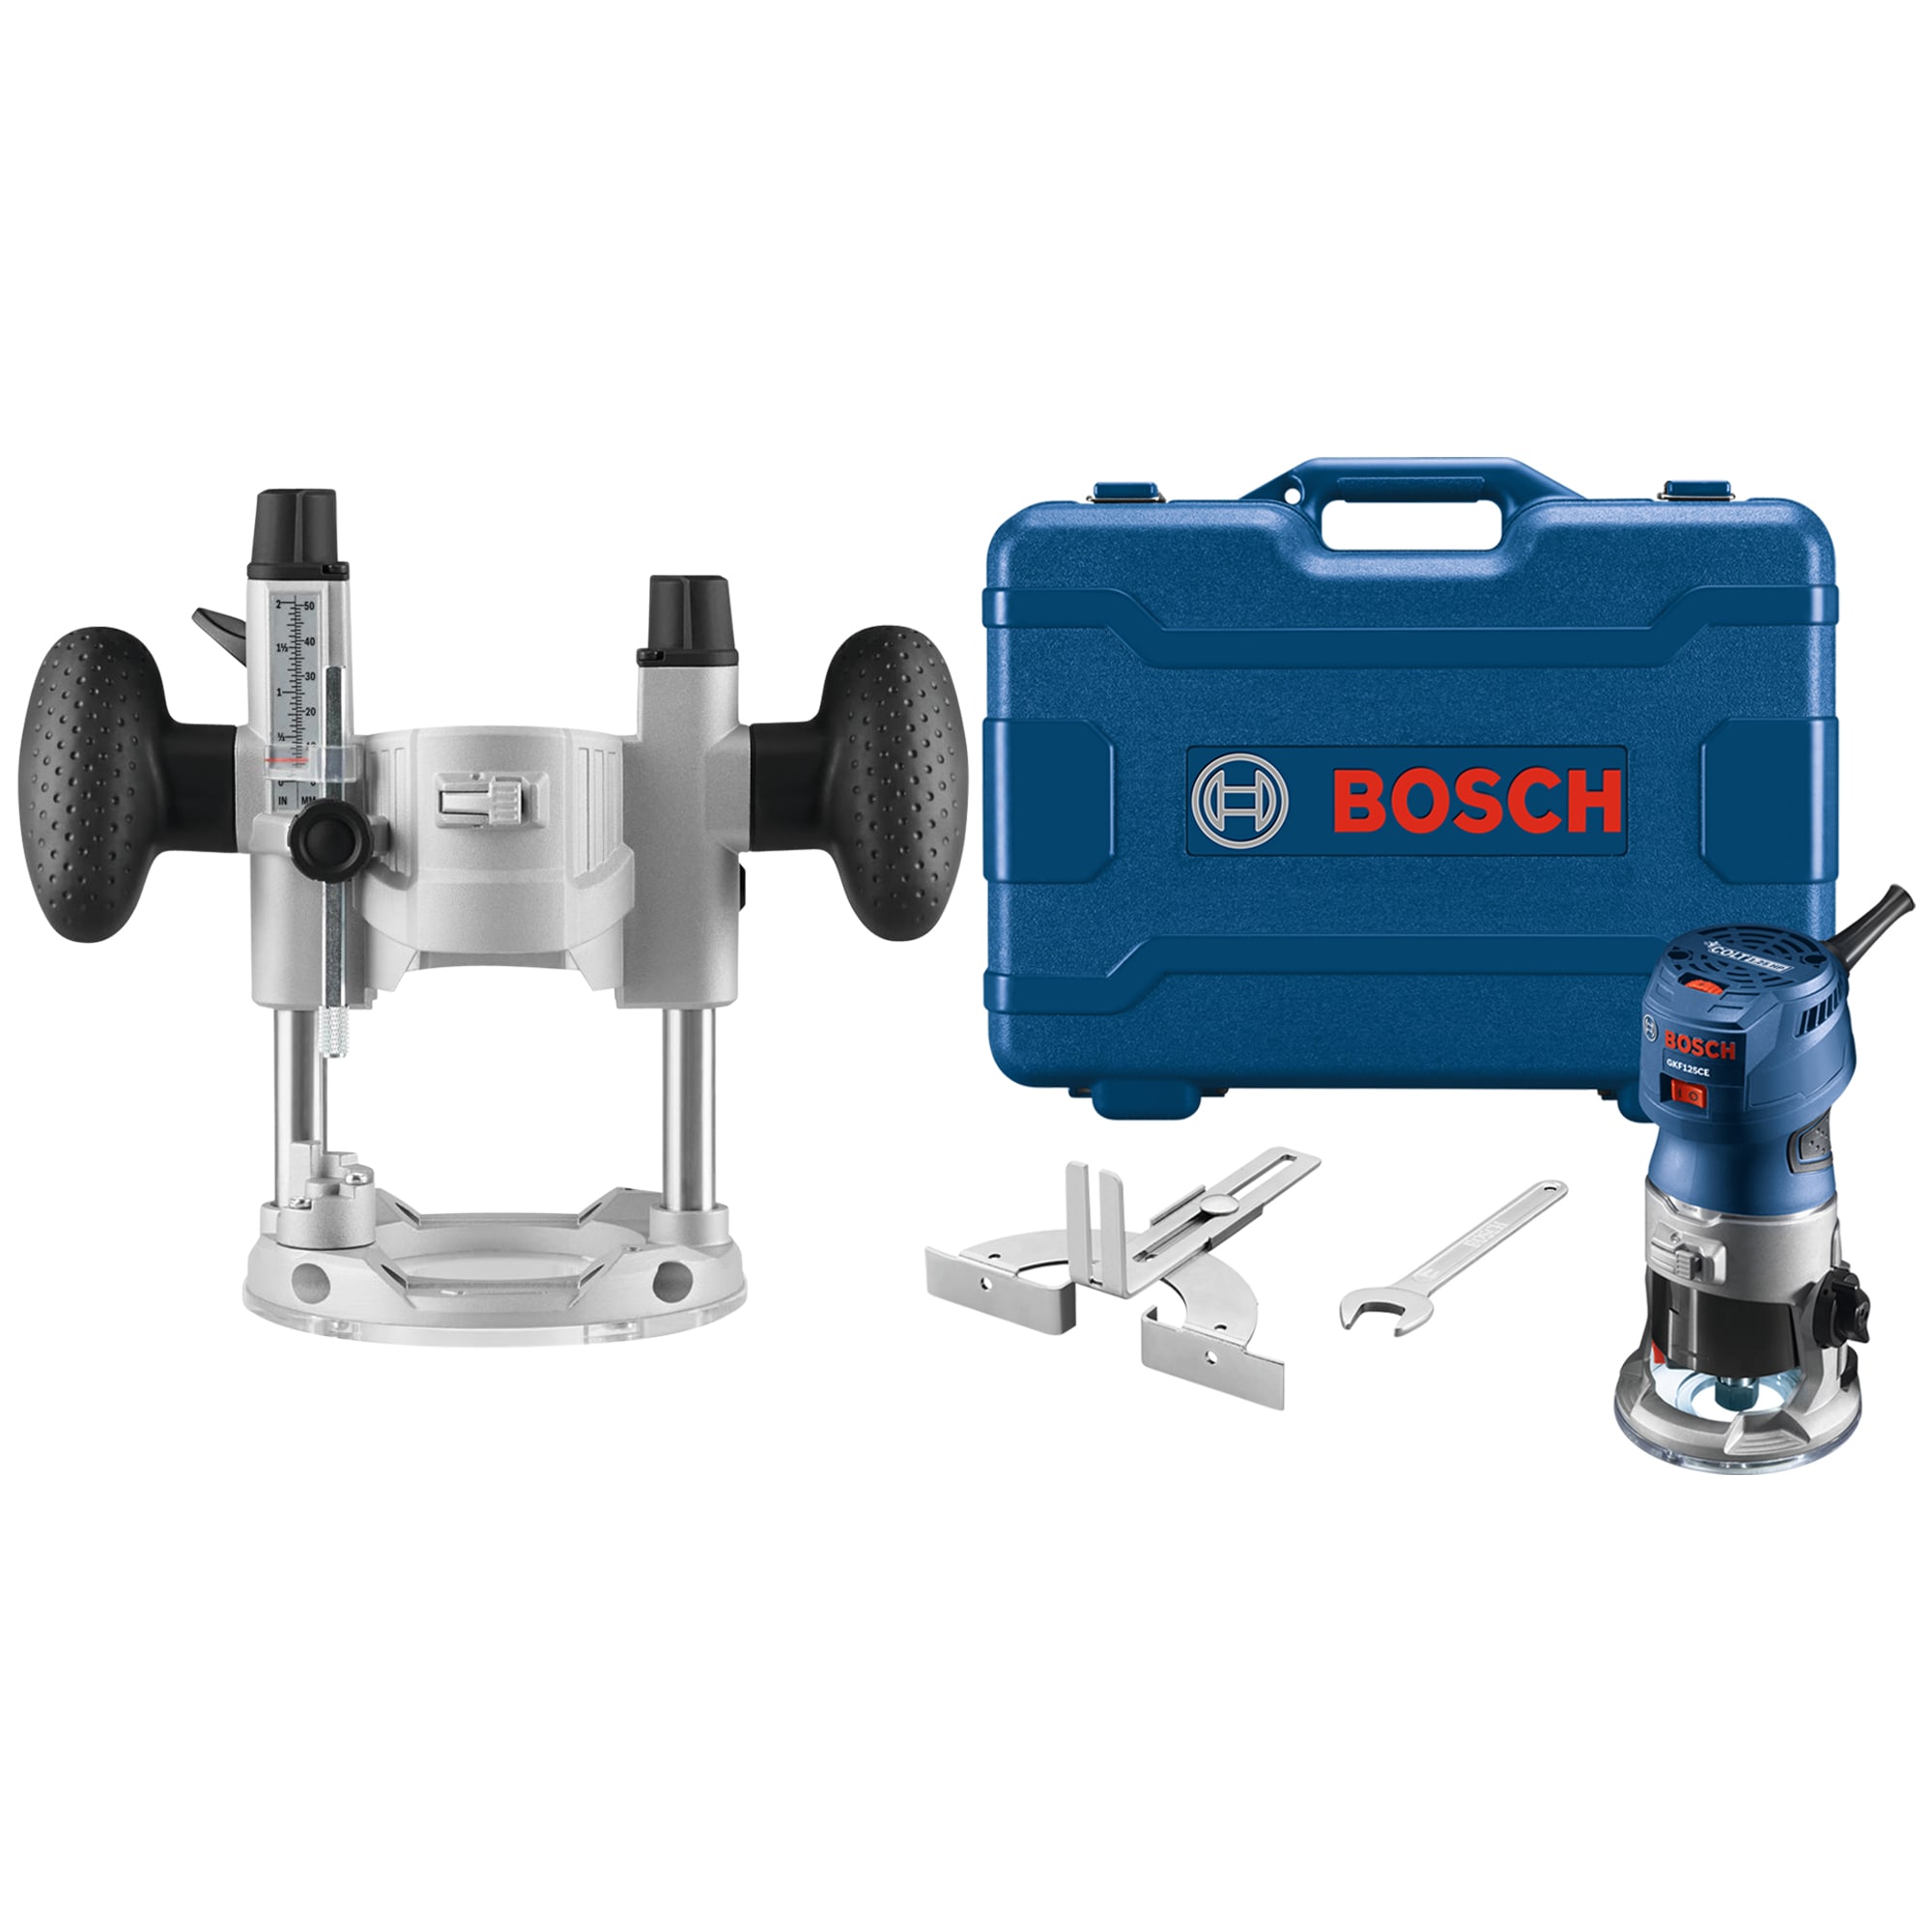 Bosch Colt 1.25-HP Variable Speed Fixed Corded Router Case + Base Lowes.com